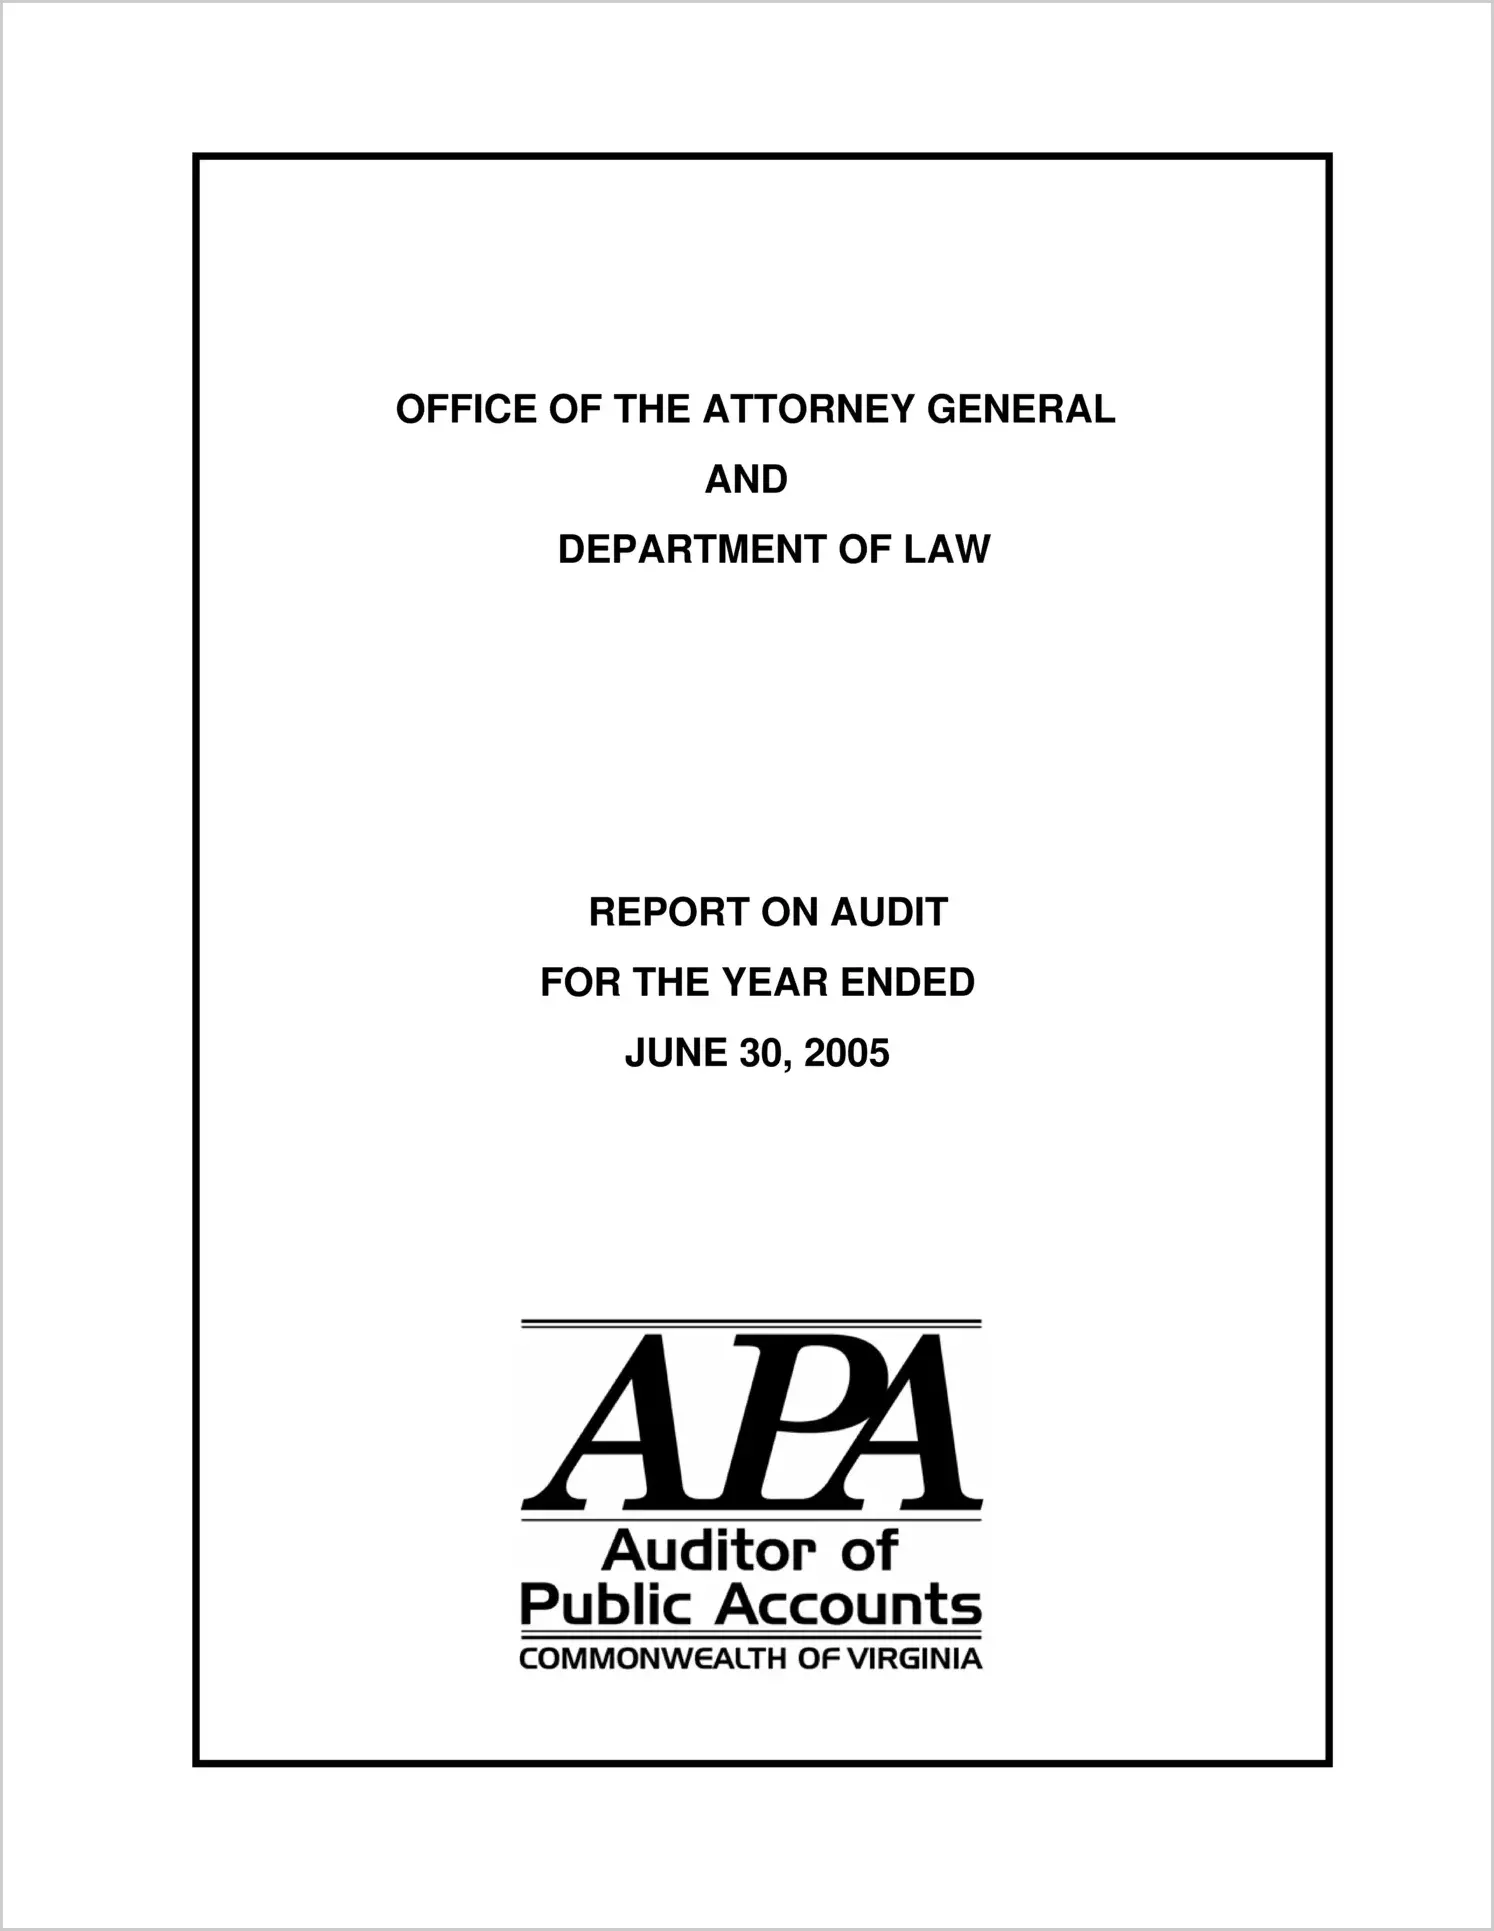 Office of the Attorney General for the year ended June 30, 2005